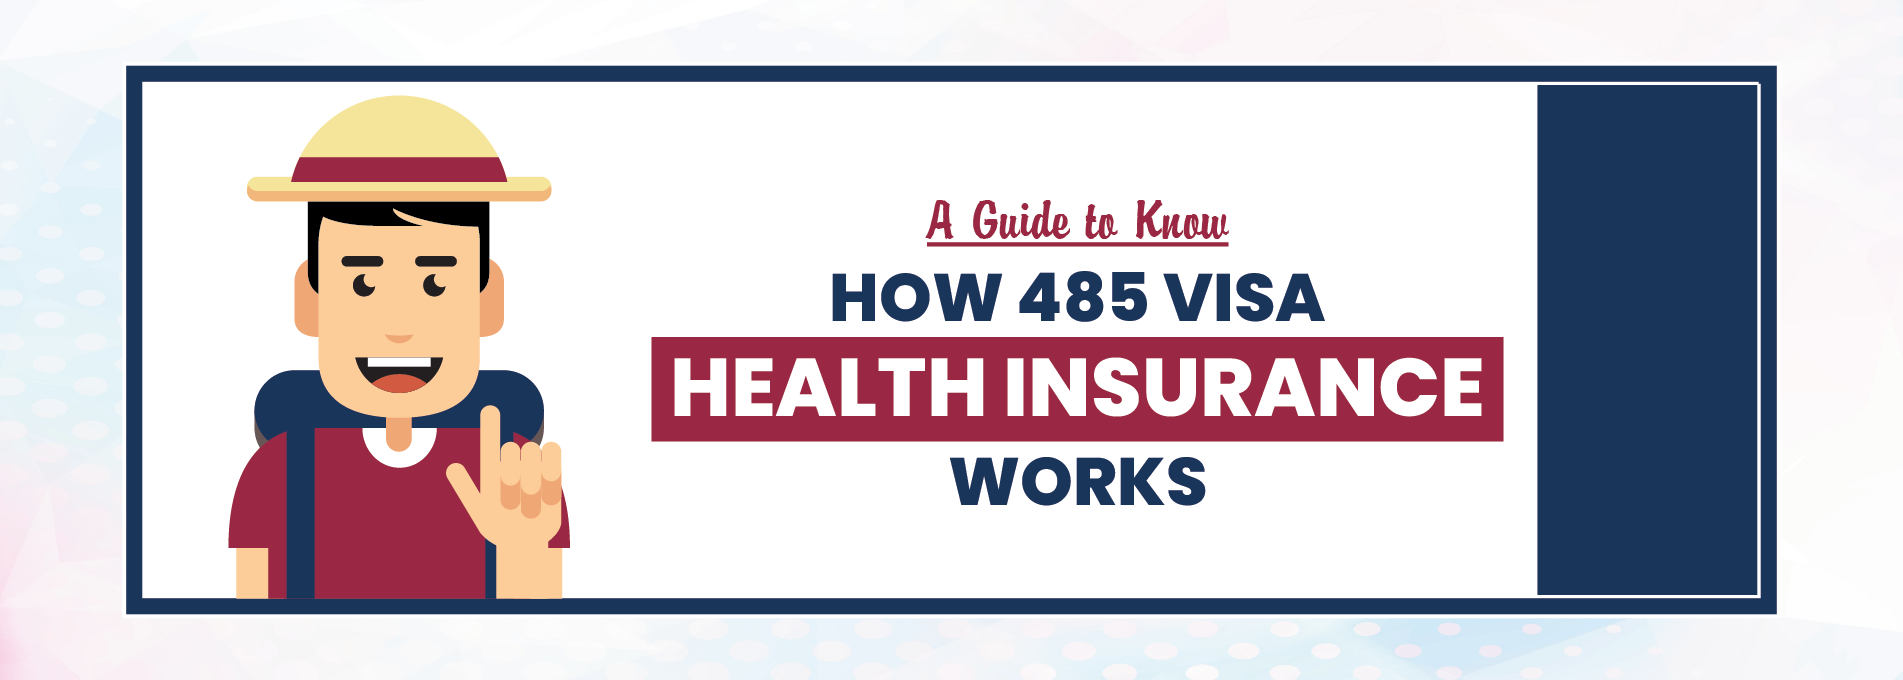 A Guide to Know How 485 Visa Health Insurance Works